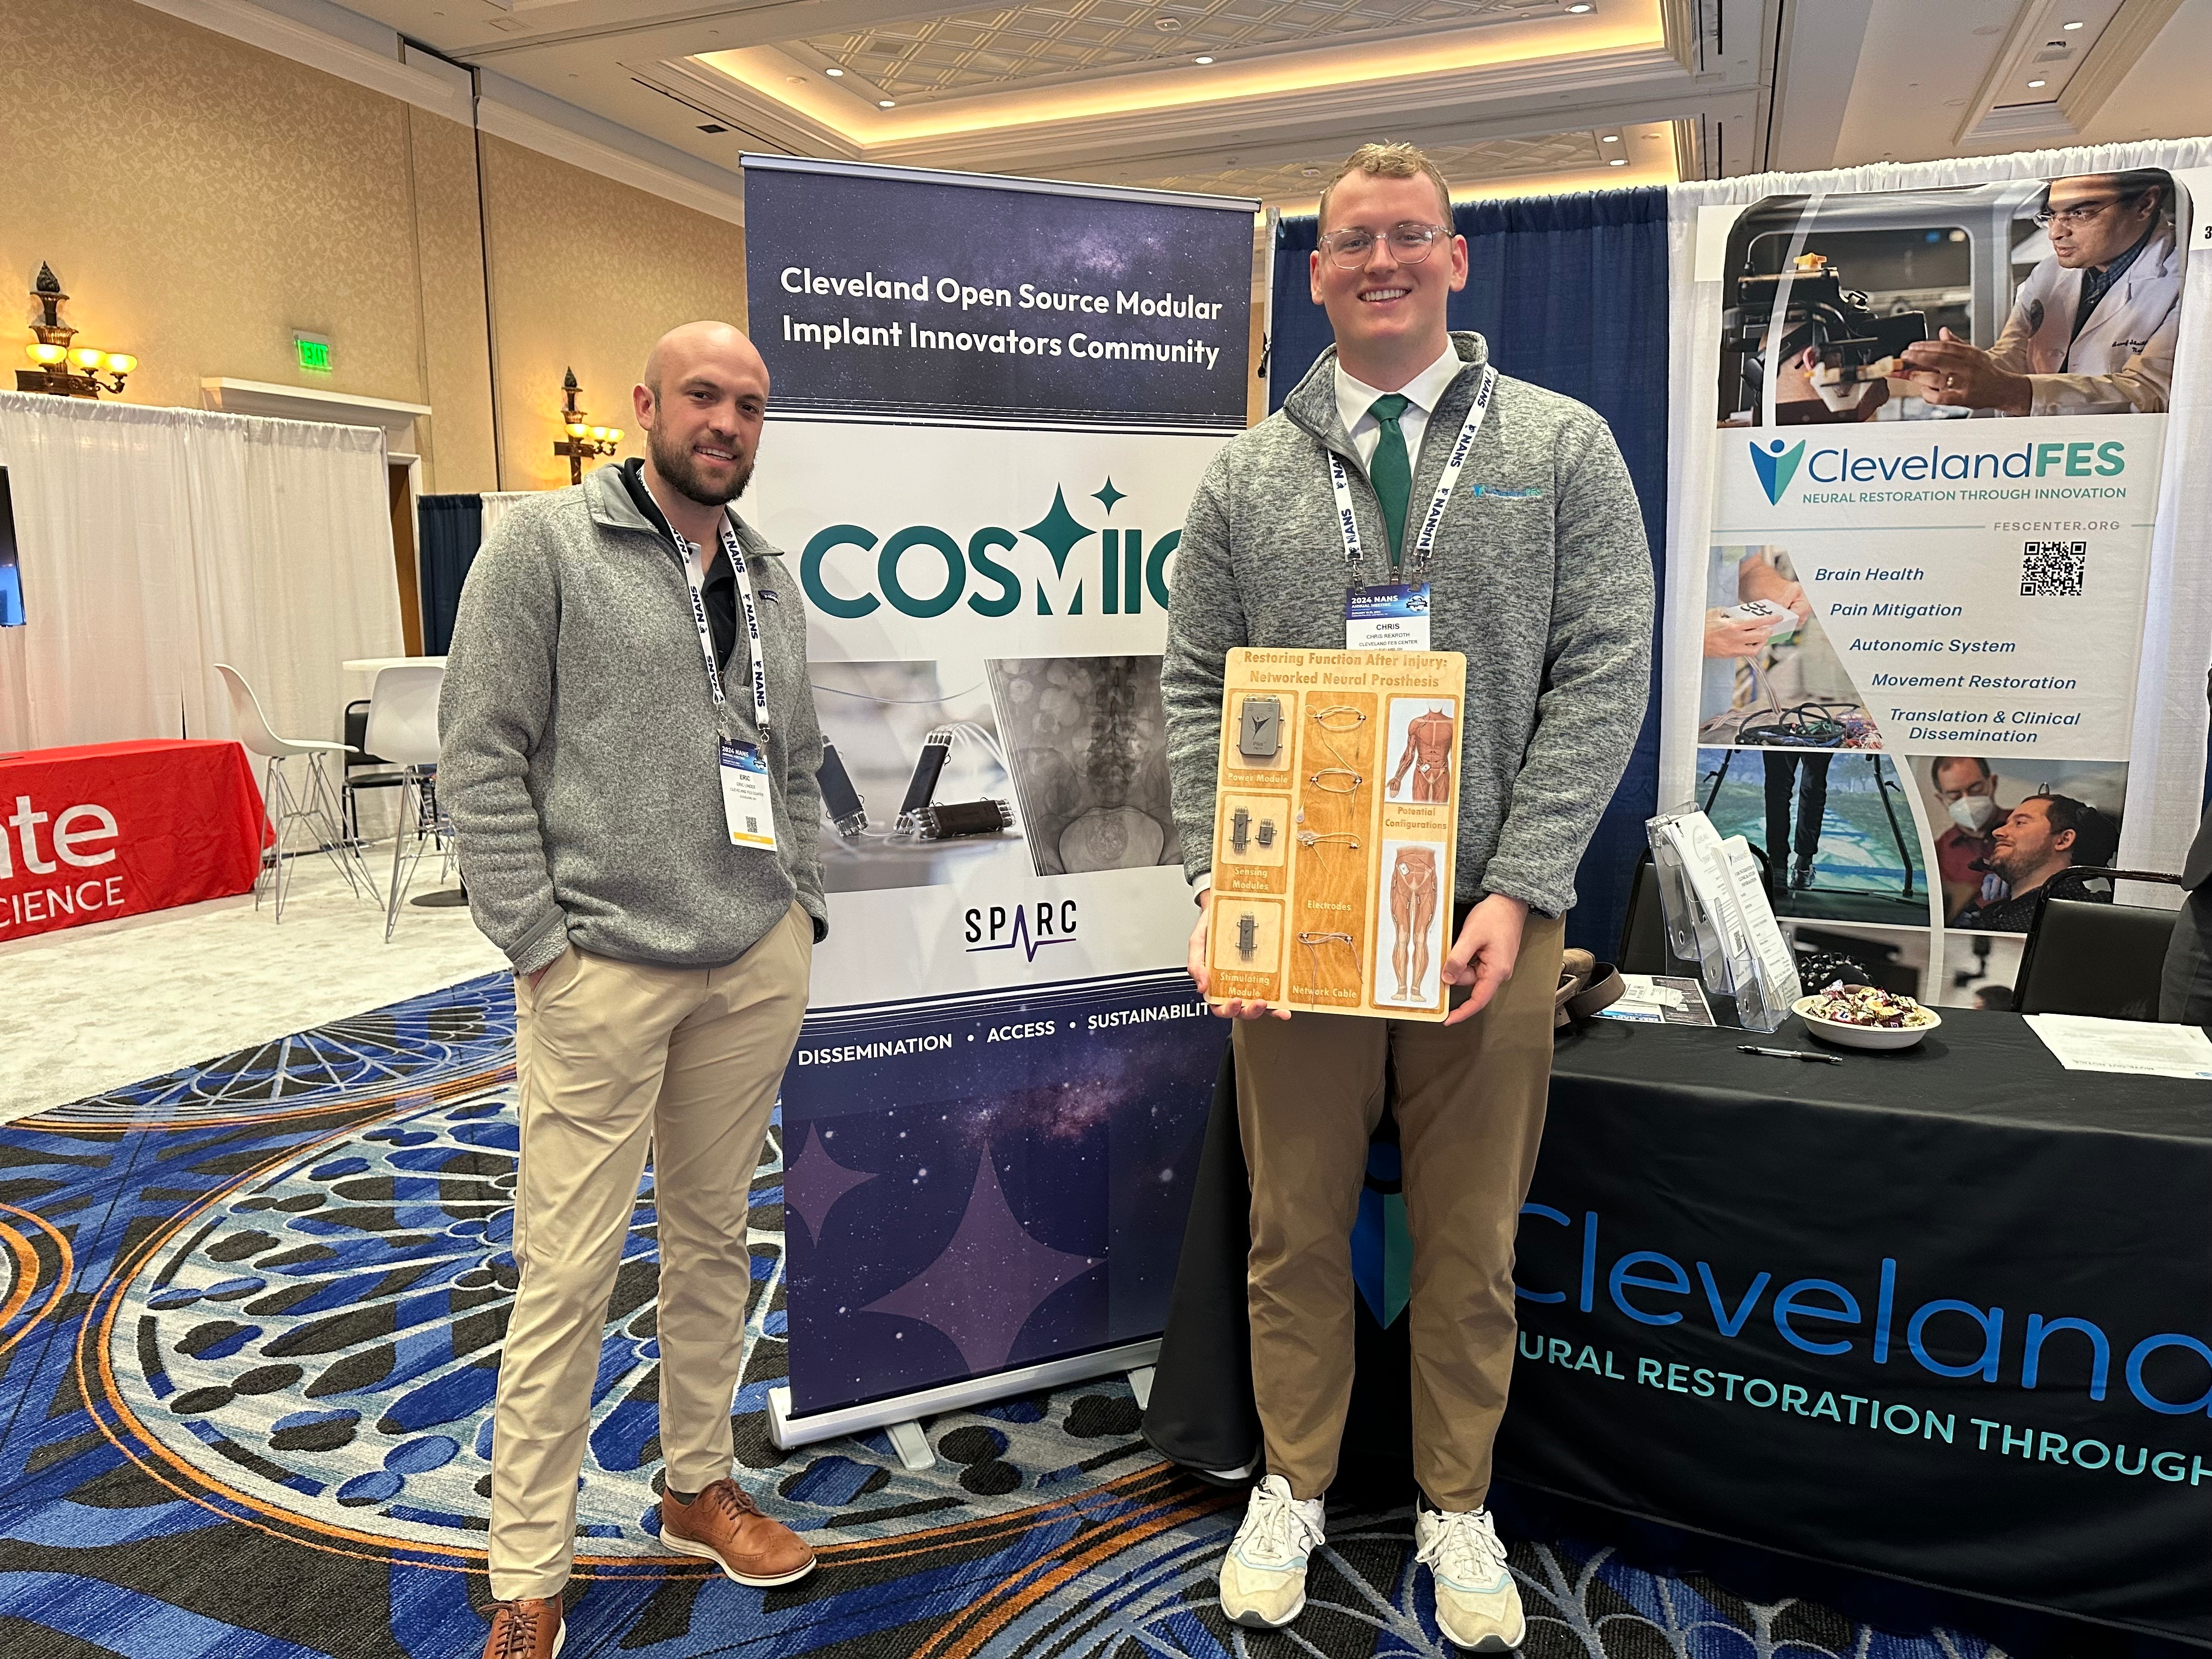 Eric Linder (left) and Chris Rexroth (right) representing COSMIIC.